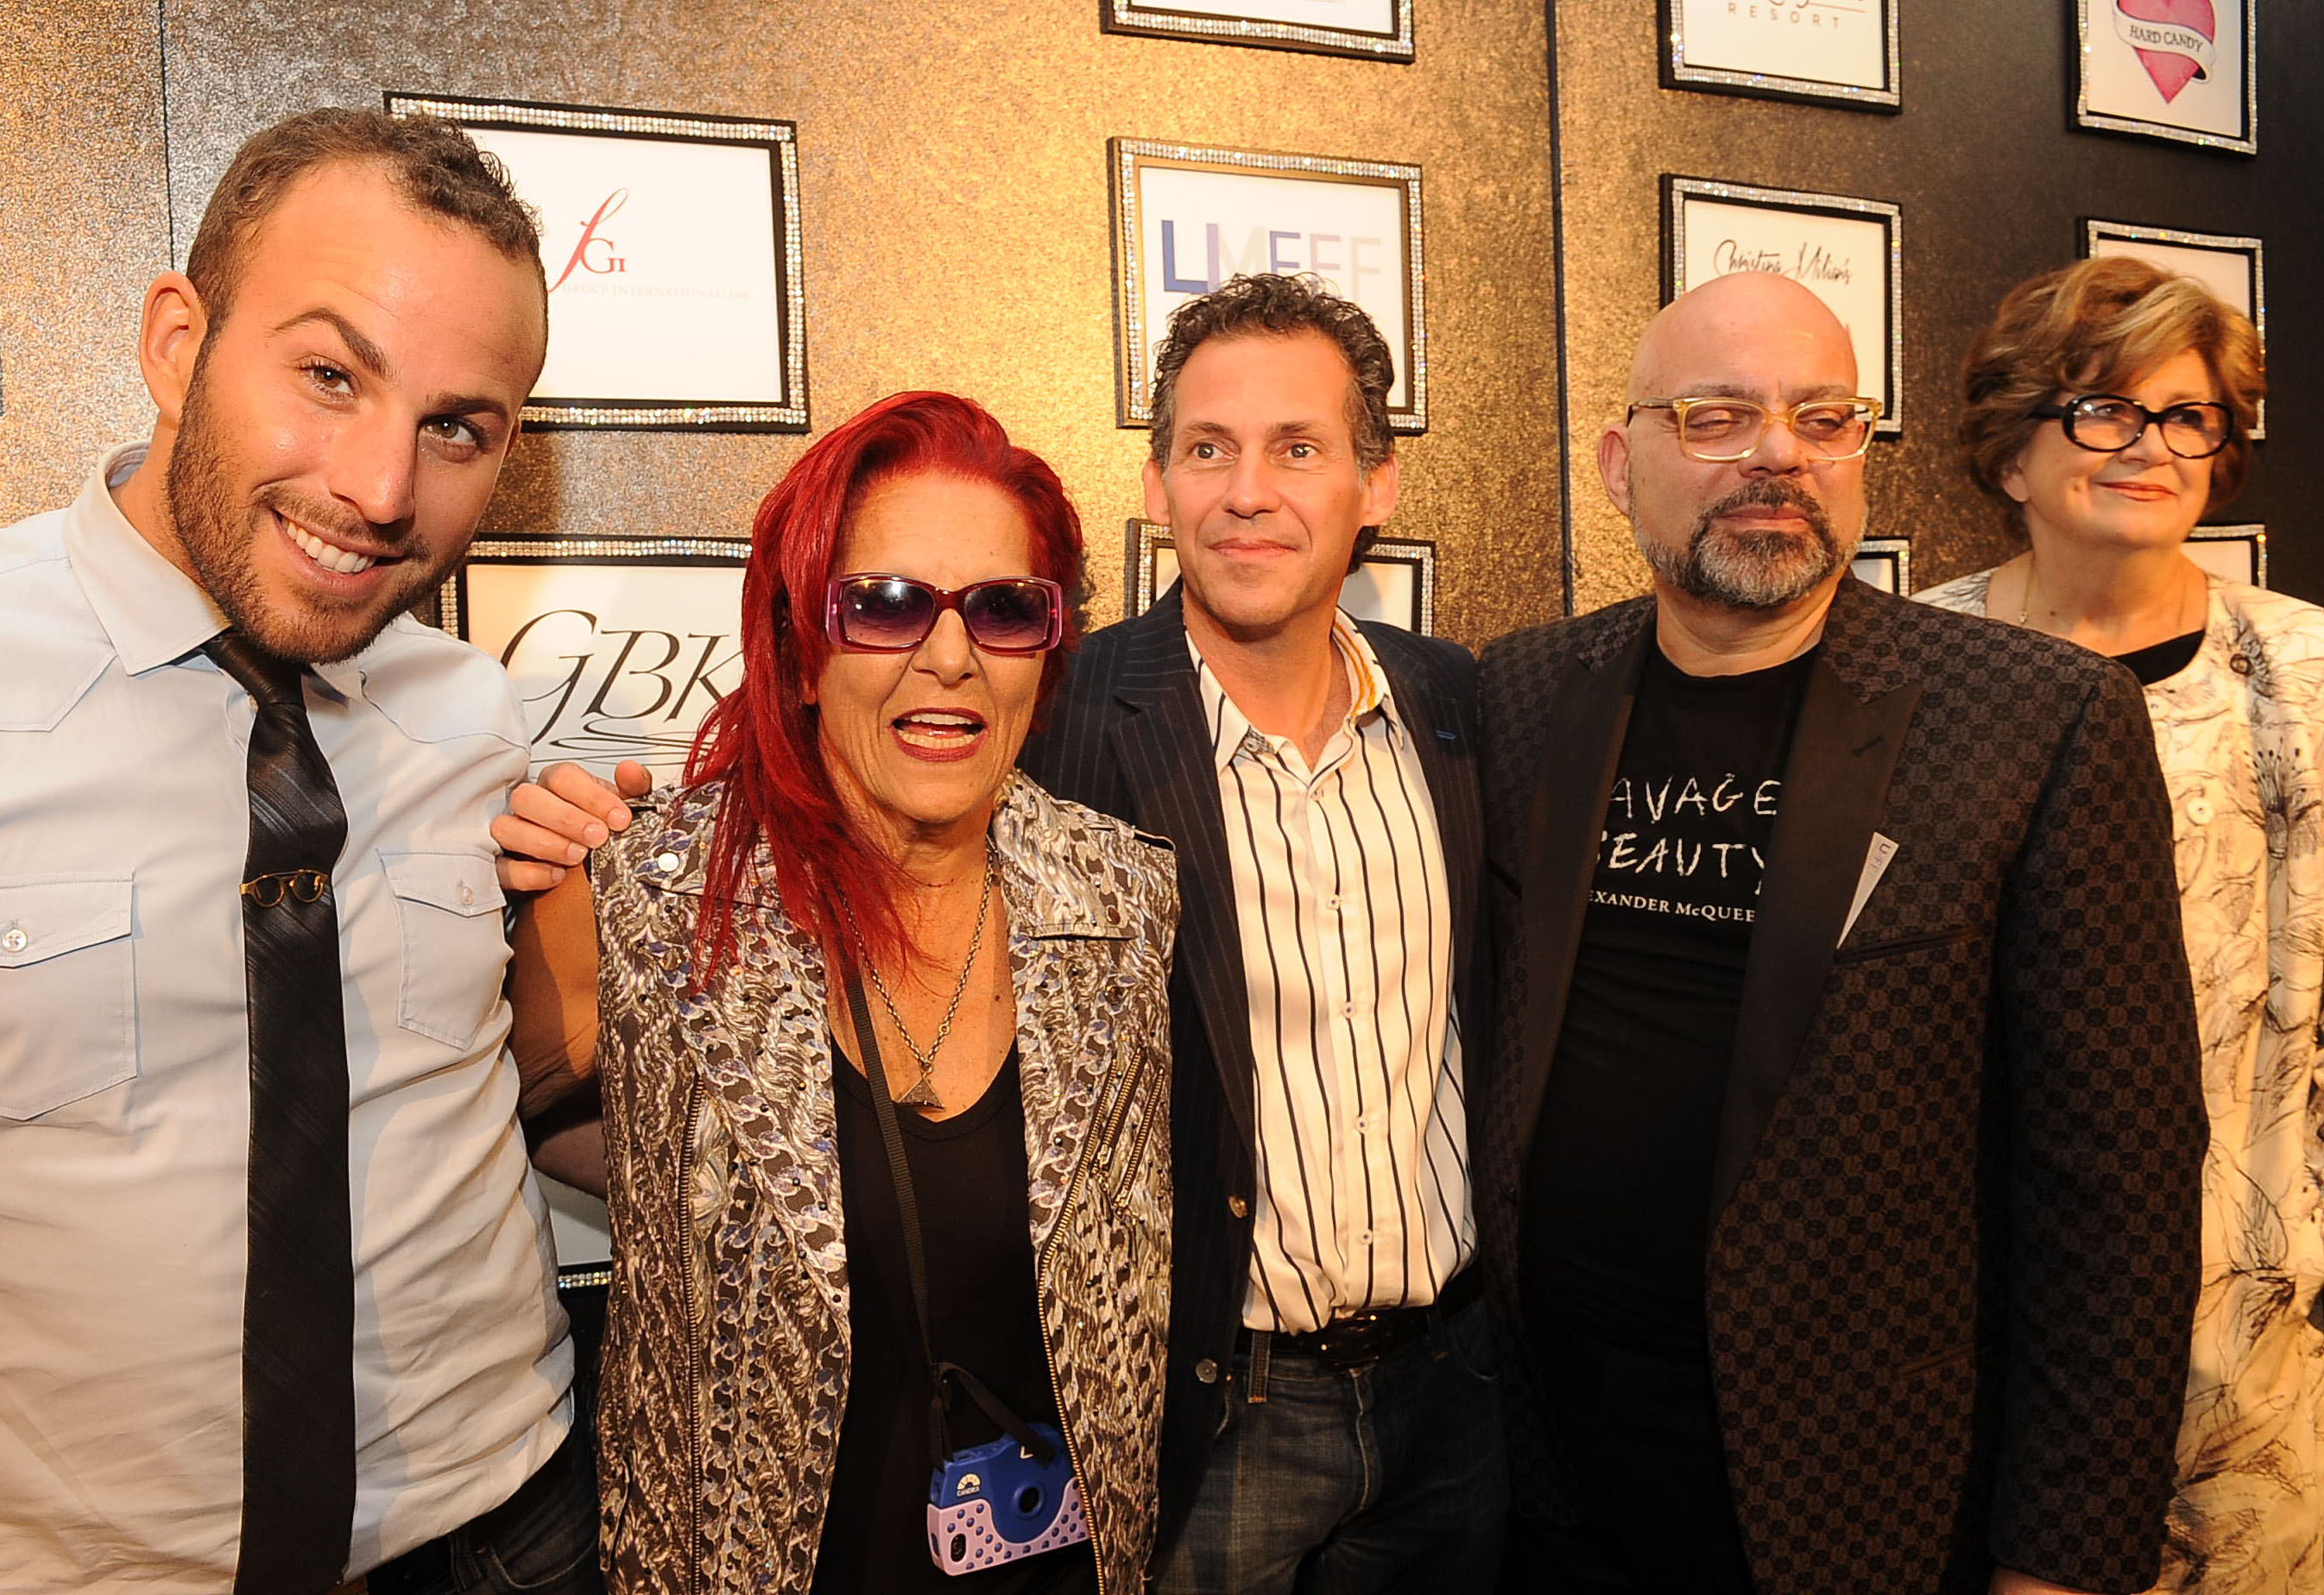 Micah Jesse, Patricia Field, Gavin Keilly, Michael Palladino, and Margaret Hayes pose for photographers